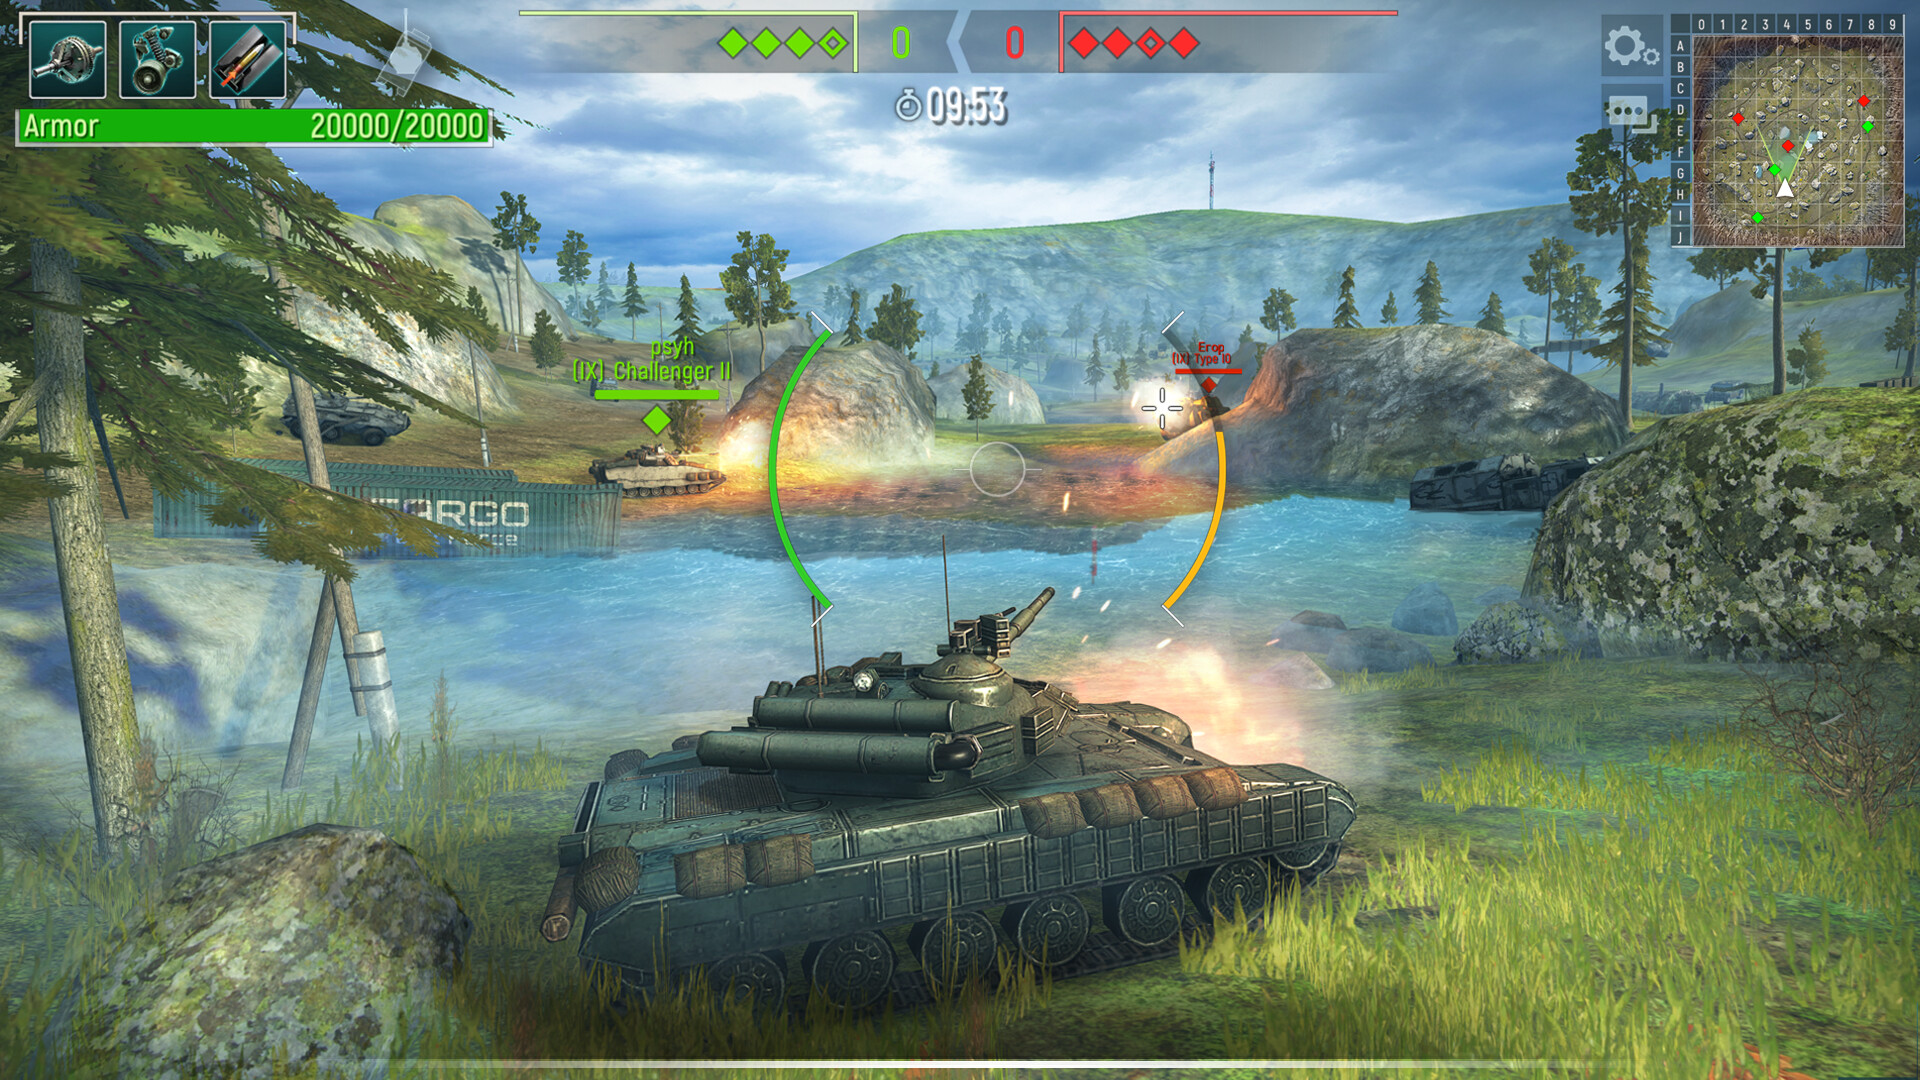 Tank Force Online Shooter Game on Steam